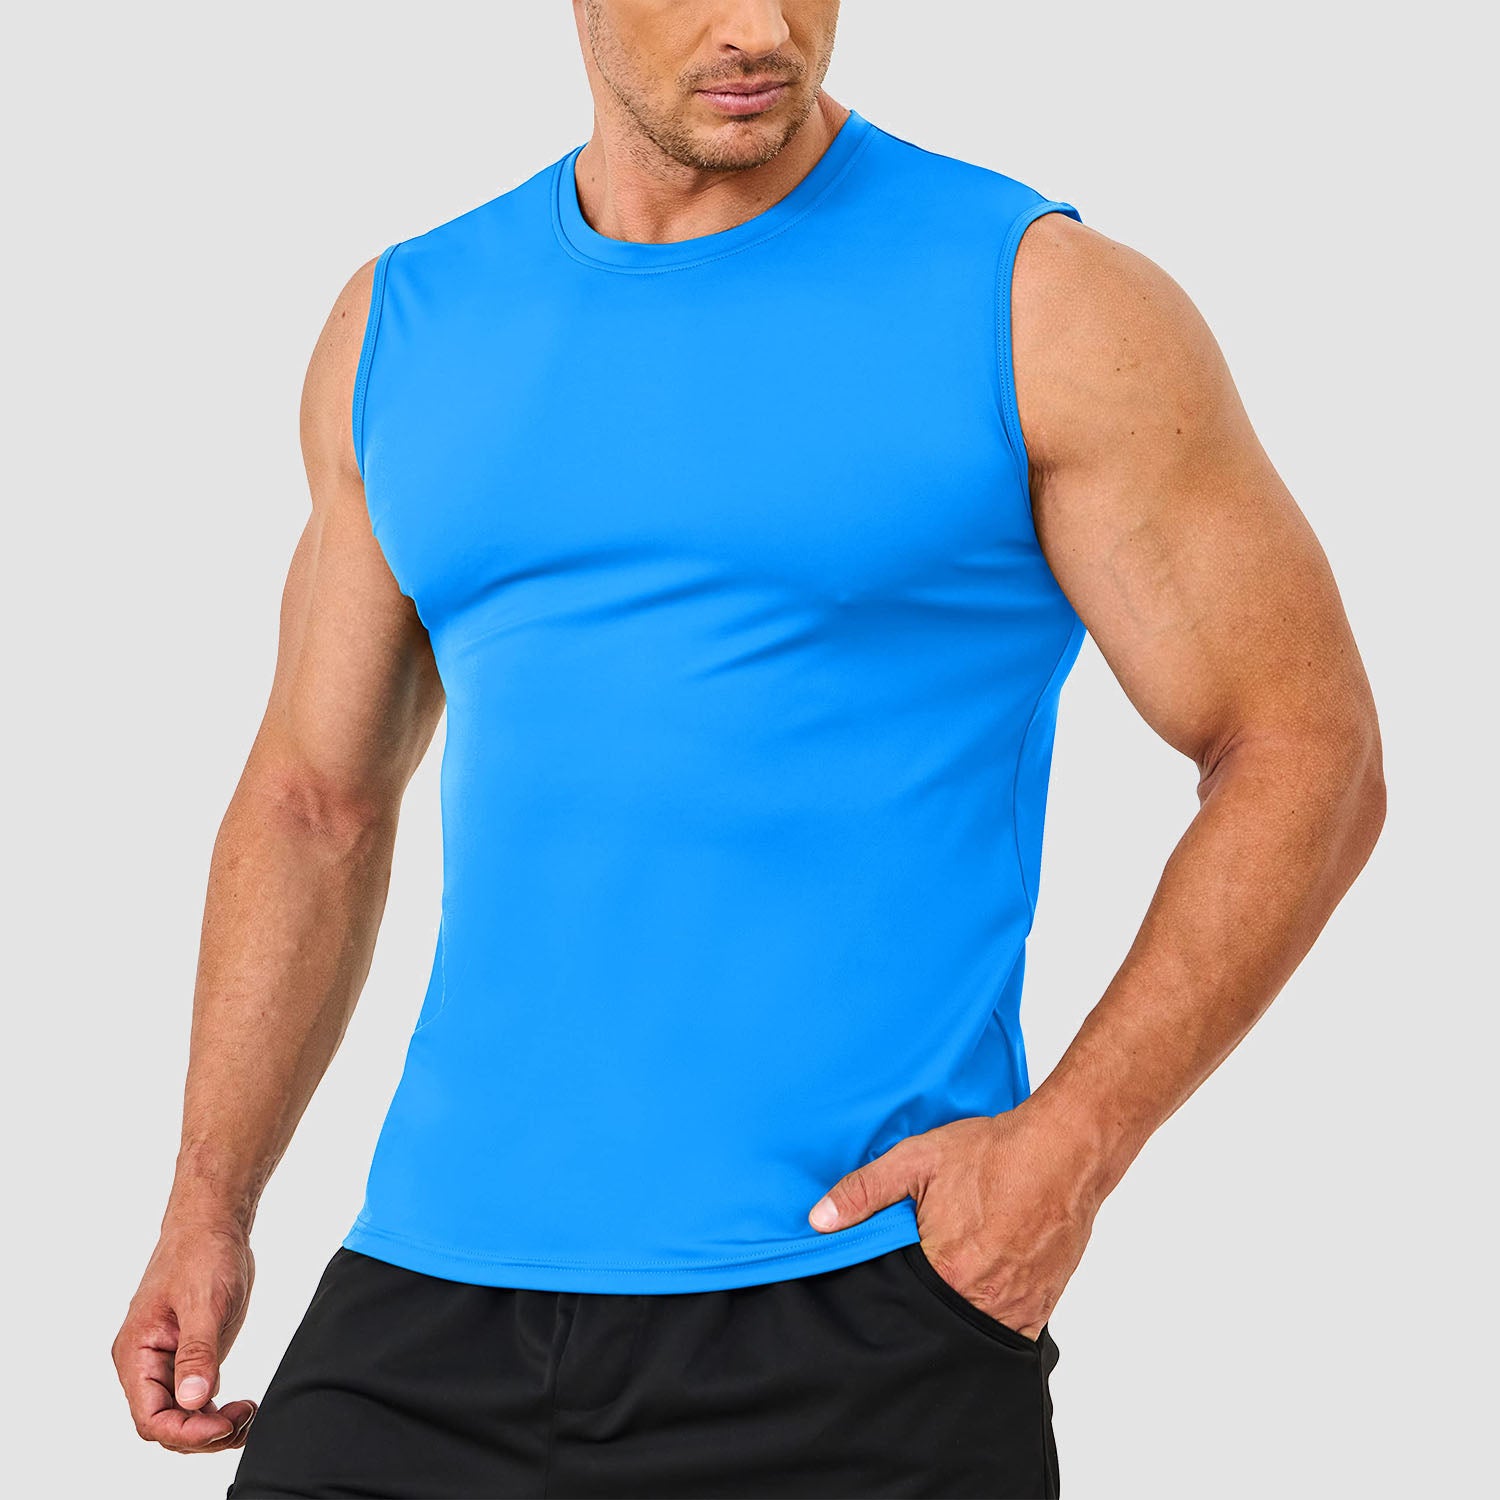 Men's Sleeveless Tank Tops UPF 80+ Sun Protection Quick Dry Workout Running Gym Muscle Undershirts